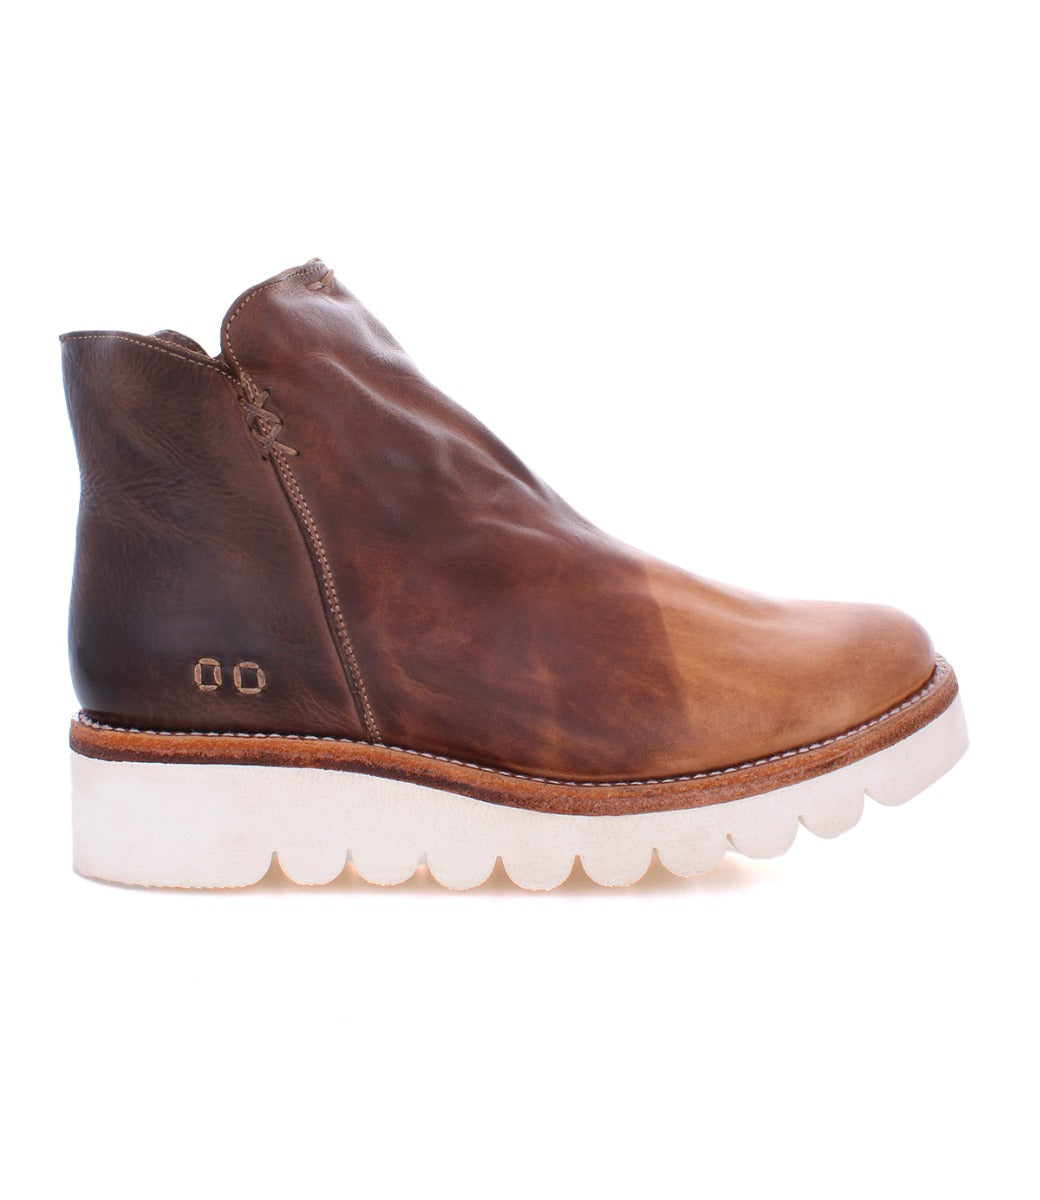 A women's brown ankle boot with a white sole, called the Lydyi by Bed Stu.